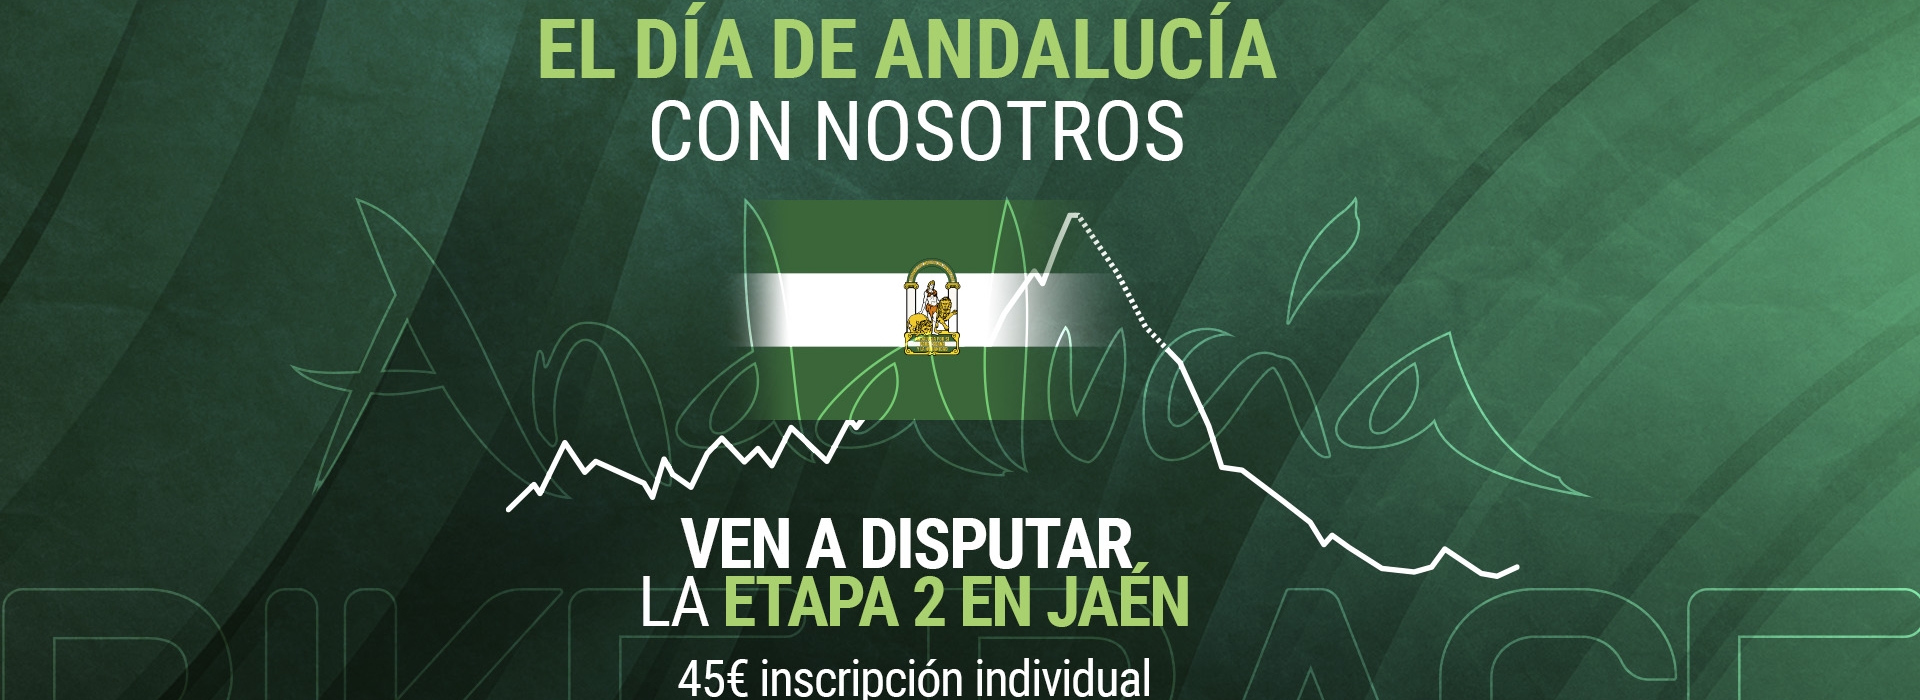 Celebrate the Andalusian Day with us!